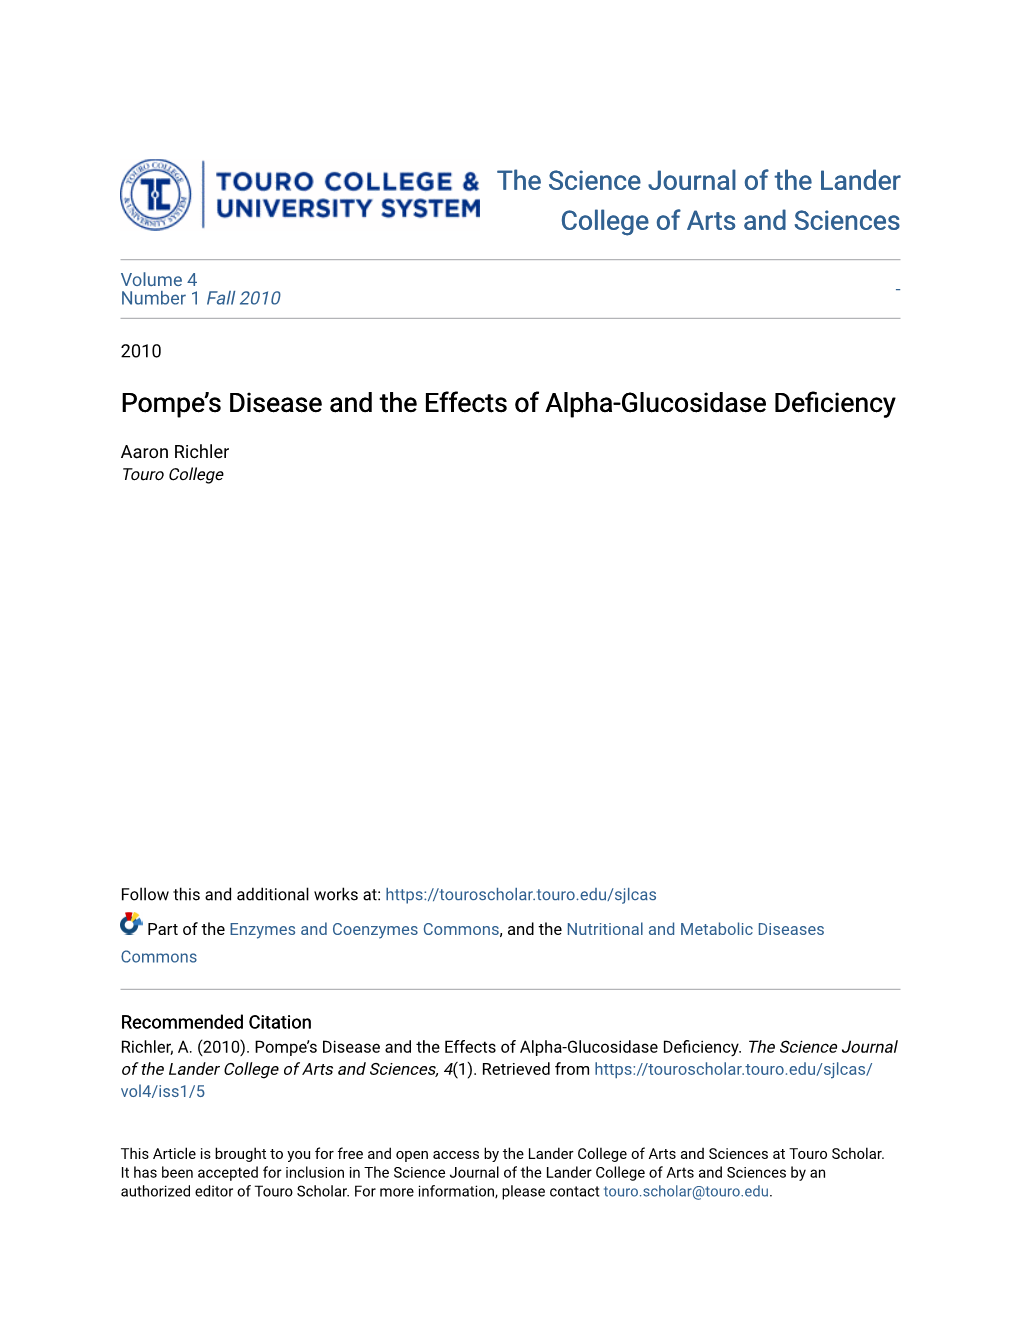 Pompe's Disease and the Effects of Alpha-Glucosidase Deficiency